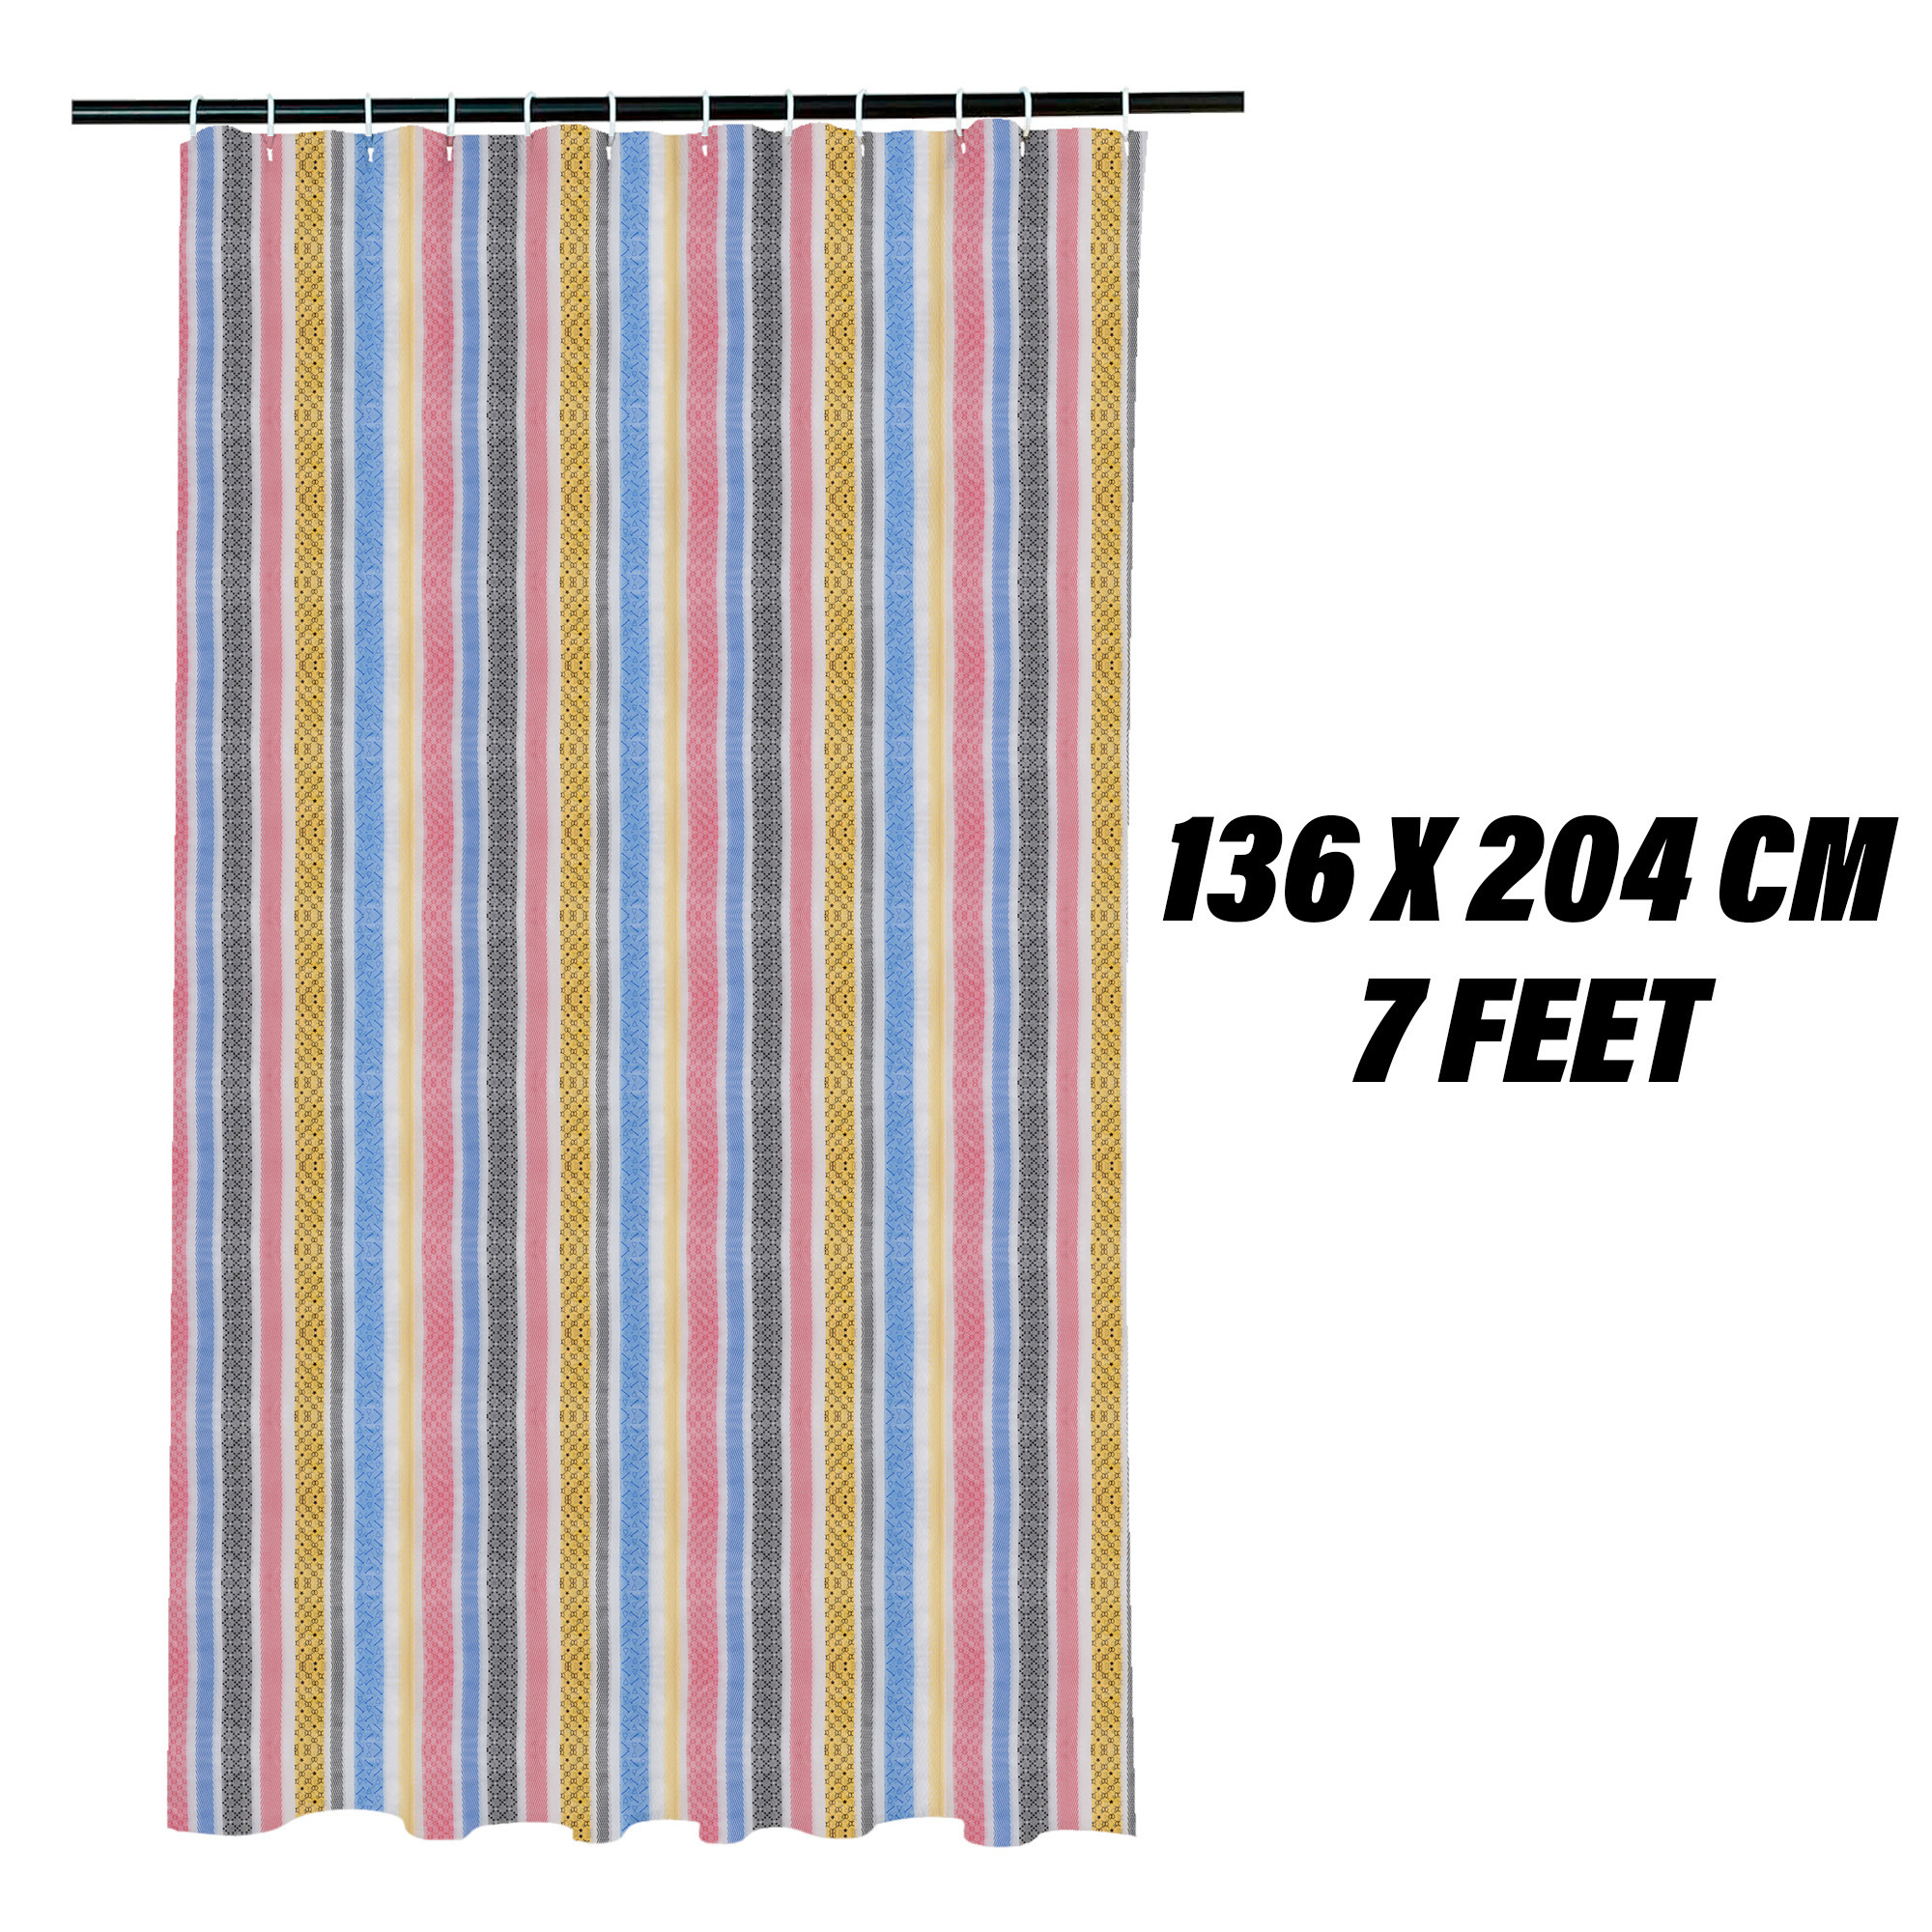 Kuber Industries AC Curtain | PVC Door Window Curtain | Curtains for Door | Lining Curtain for Bathroom | Window Blackout Curtain | Shower Curtain with 8 Rings | 7 Feet | Multicolor